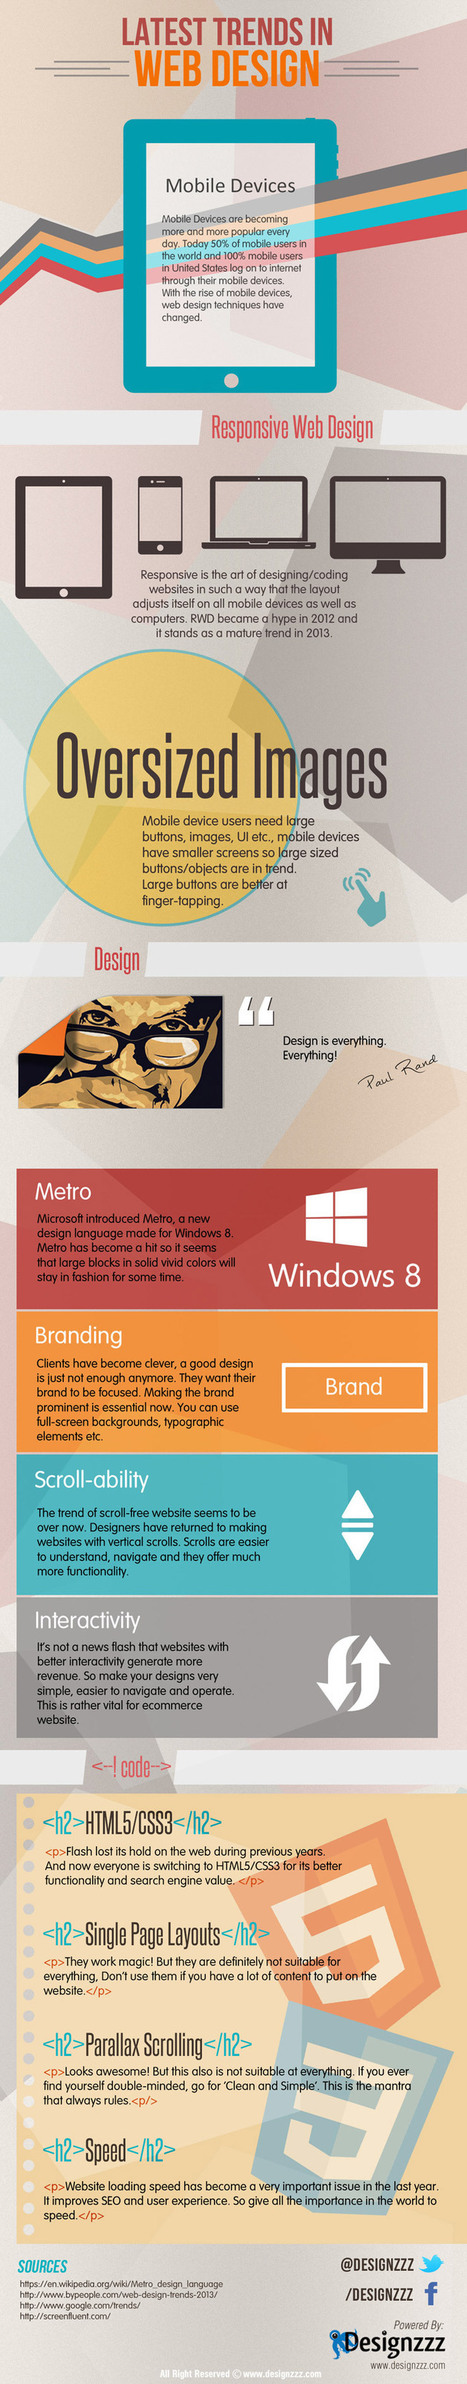 Latest Trends in Web Design [Infographic] | E-Learning-Inclusivo (Mashup) | Scoop.it